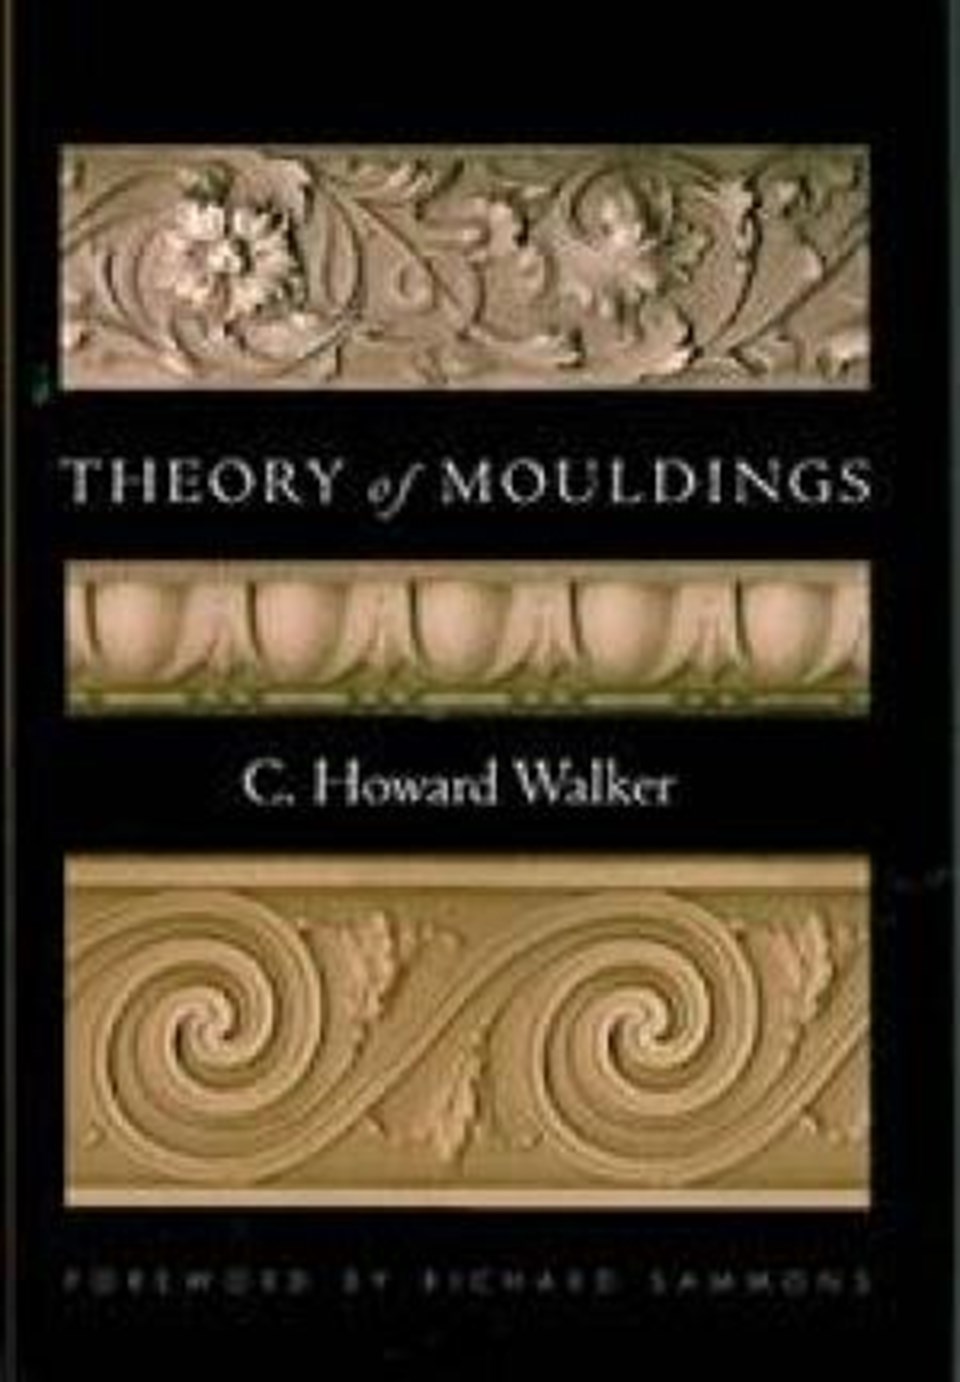 Theory of mouldings